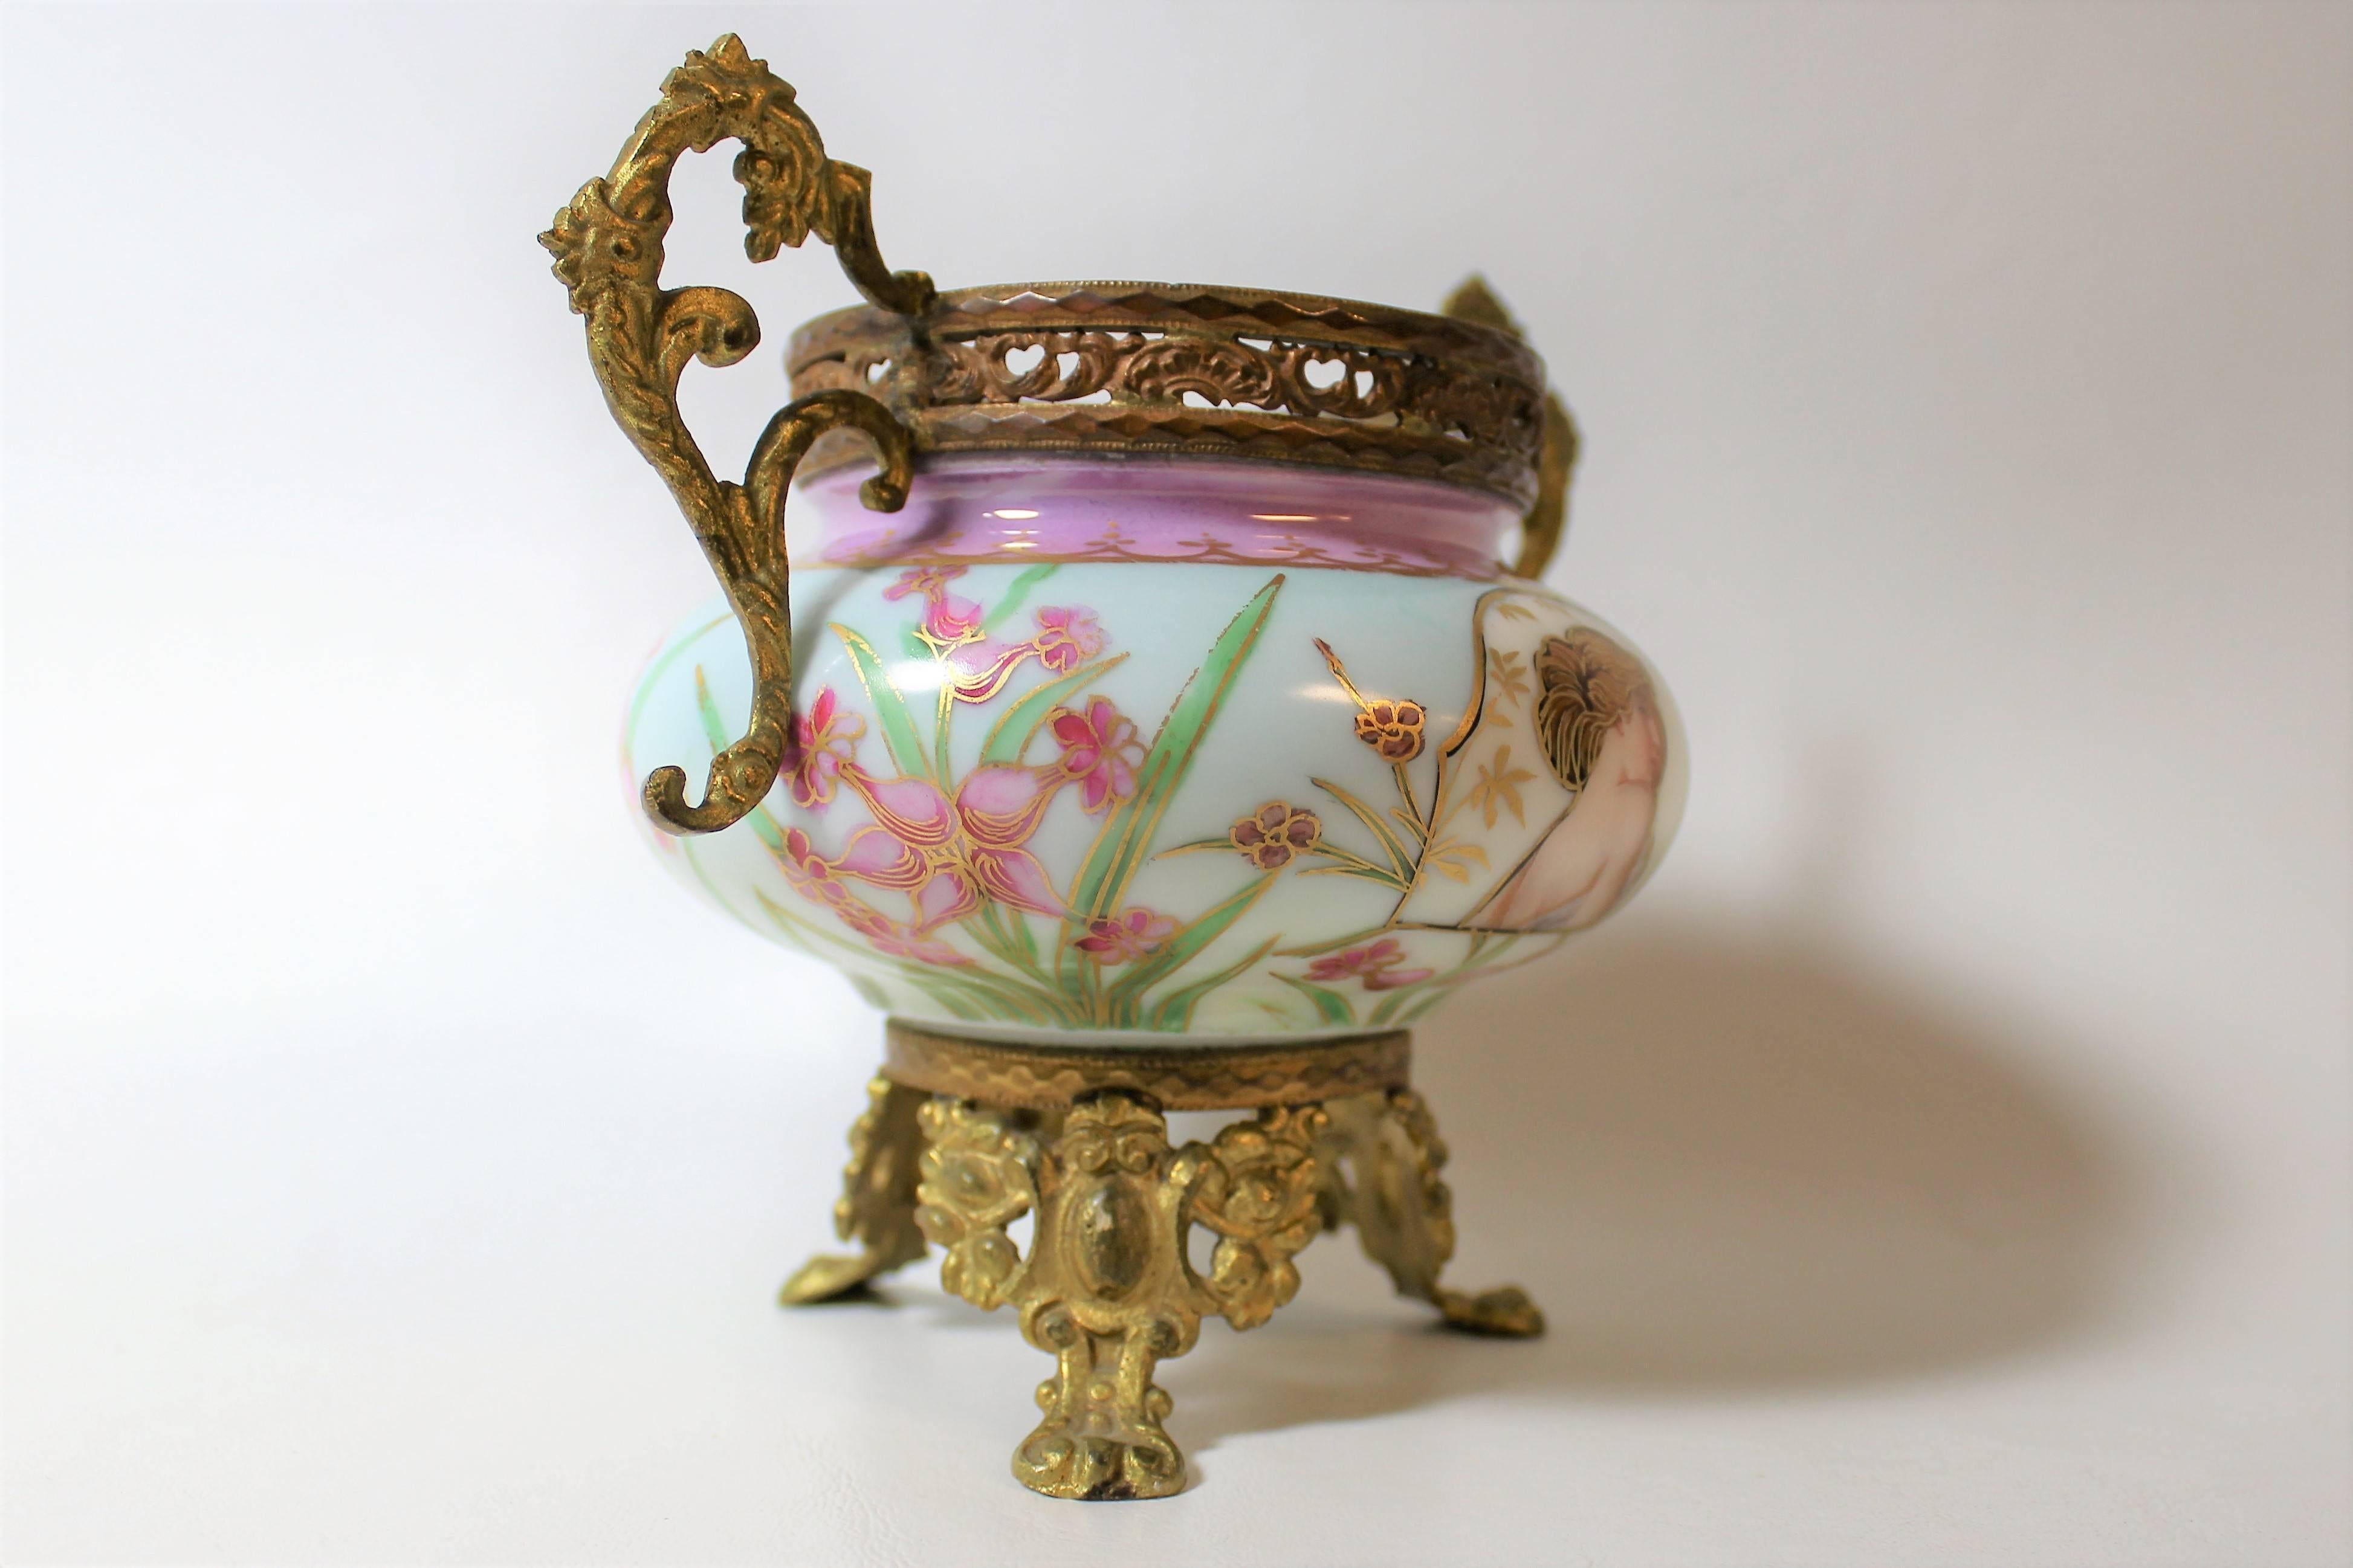 20th Century Art Nouveau French Porcelain Ormolu-Mounted Urn For Sale